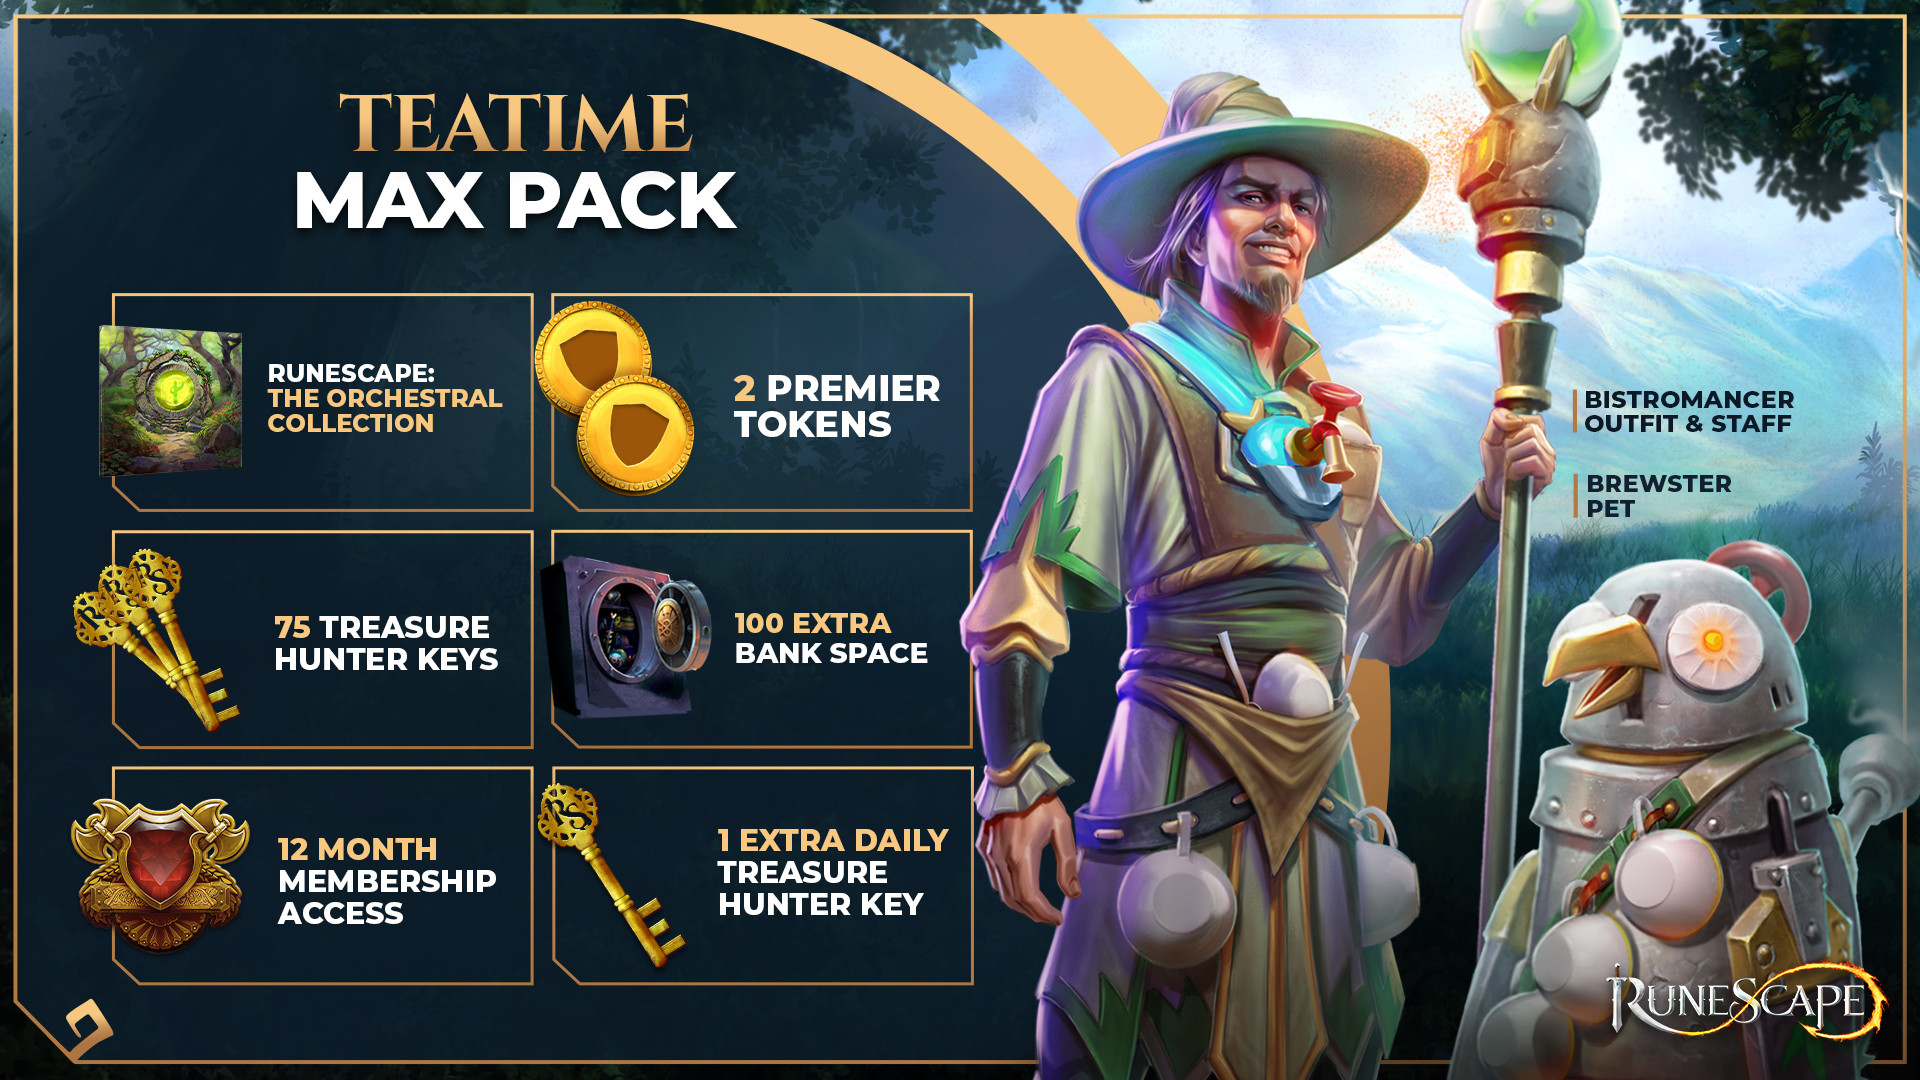 Runescape - Max Pack + 12 Months Membership Manual Delivery (56.49$)